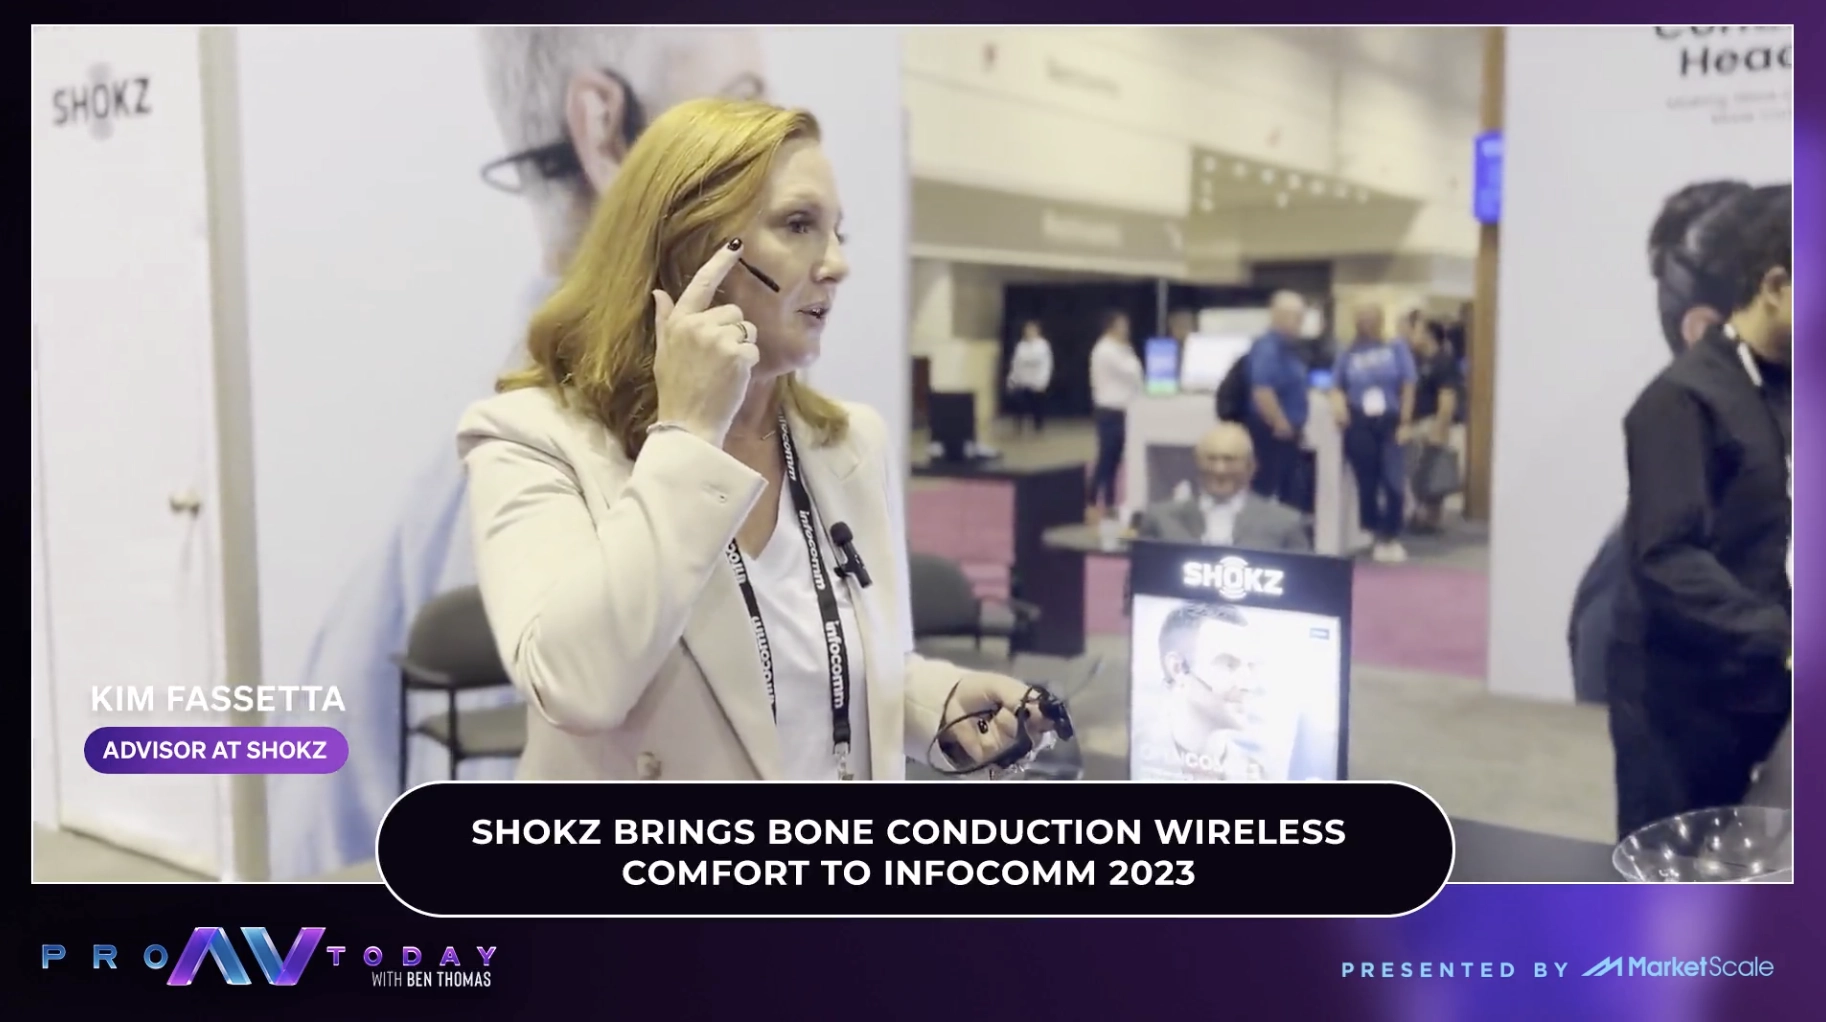 InfoComm 2023: Can You Hear Through Your Cheekbones? Bone Conduction is the Latest Innovation in Audio Technology